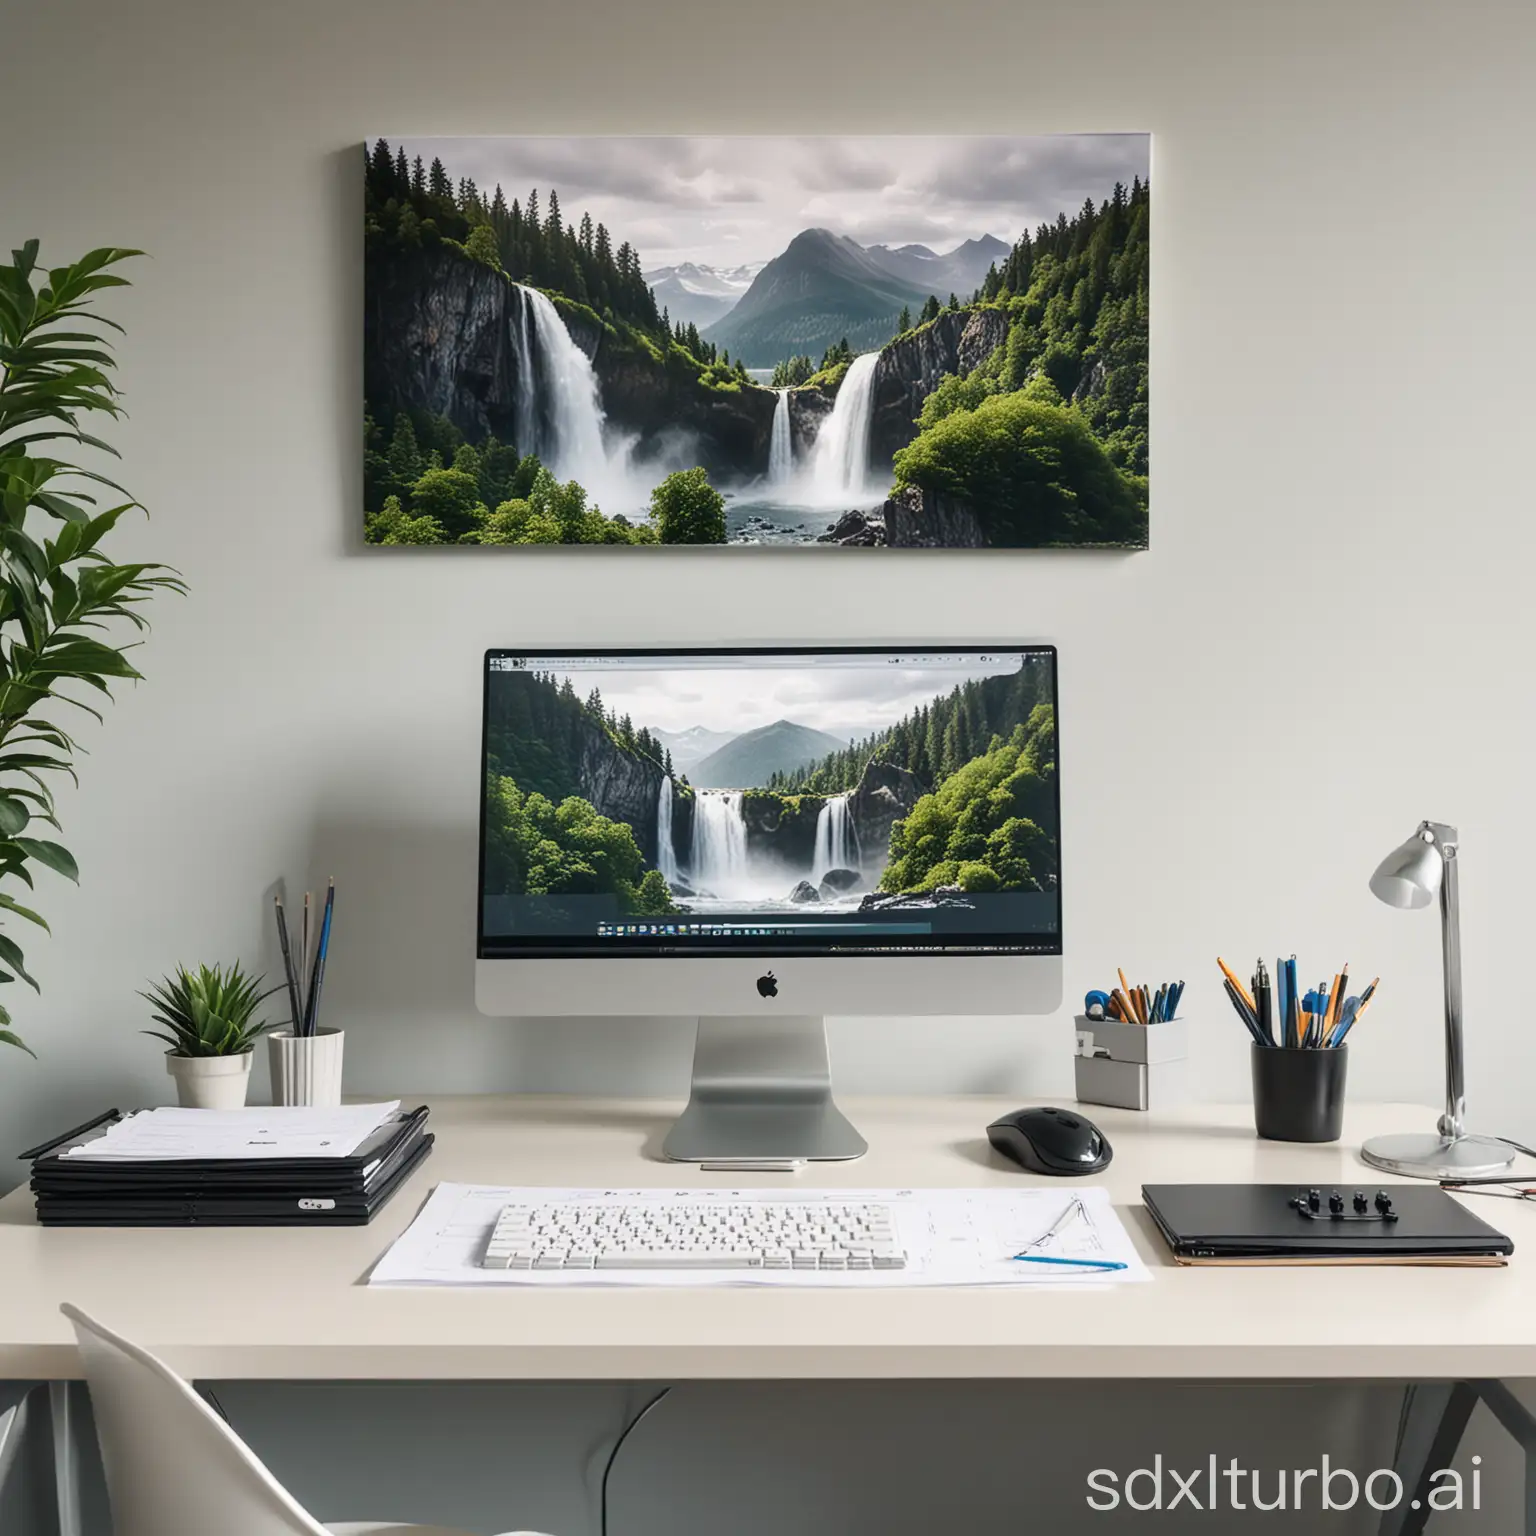 Bright-Modern-Office-Workspace-with-Computer-Setup-and-Waterfall-Landscape-Photo